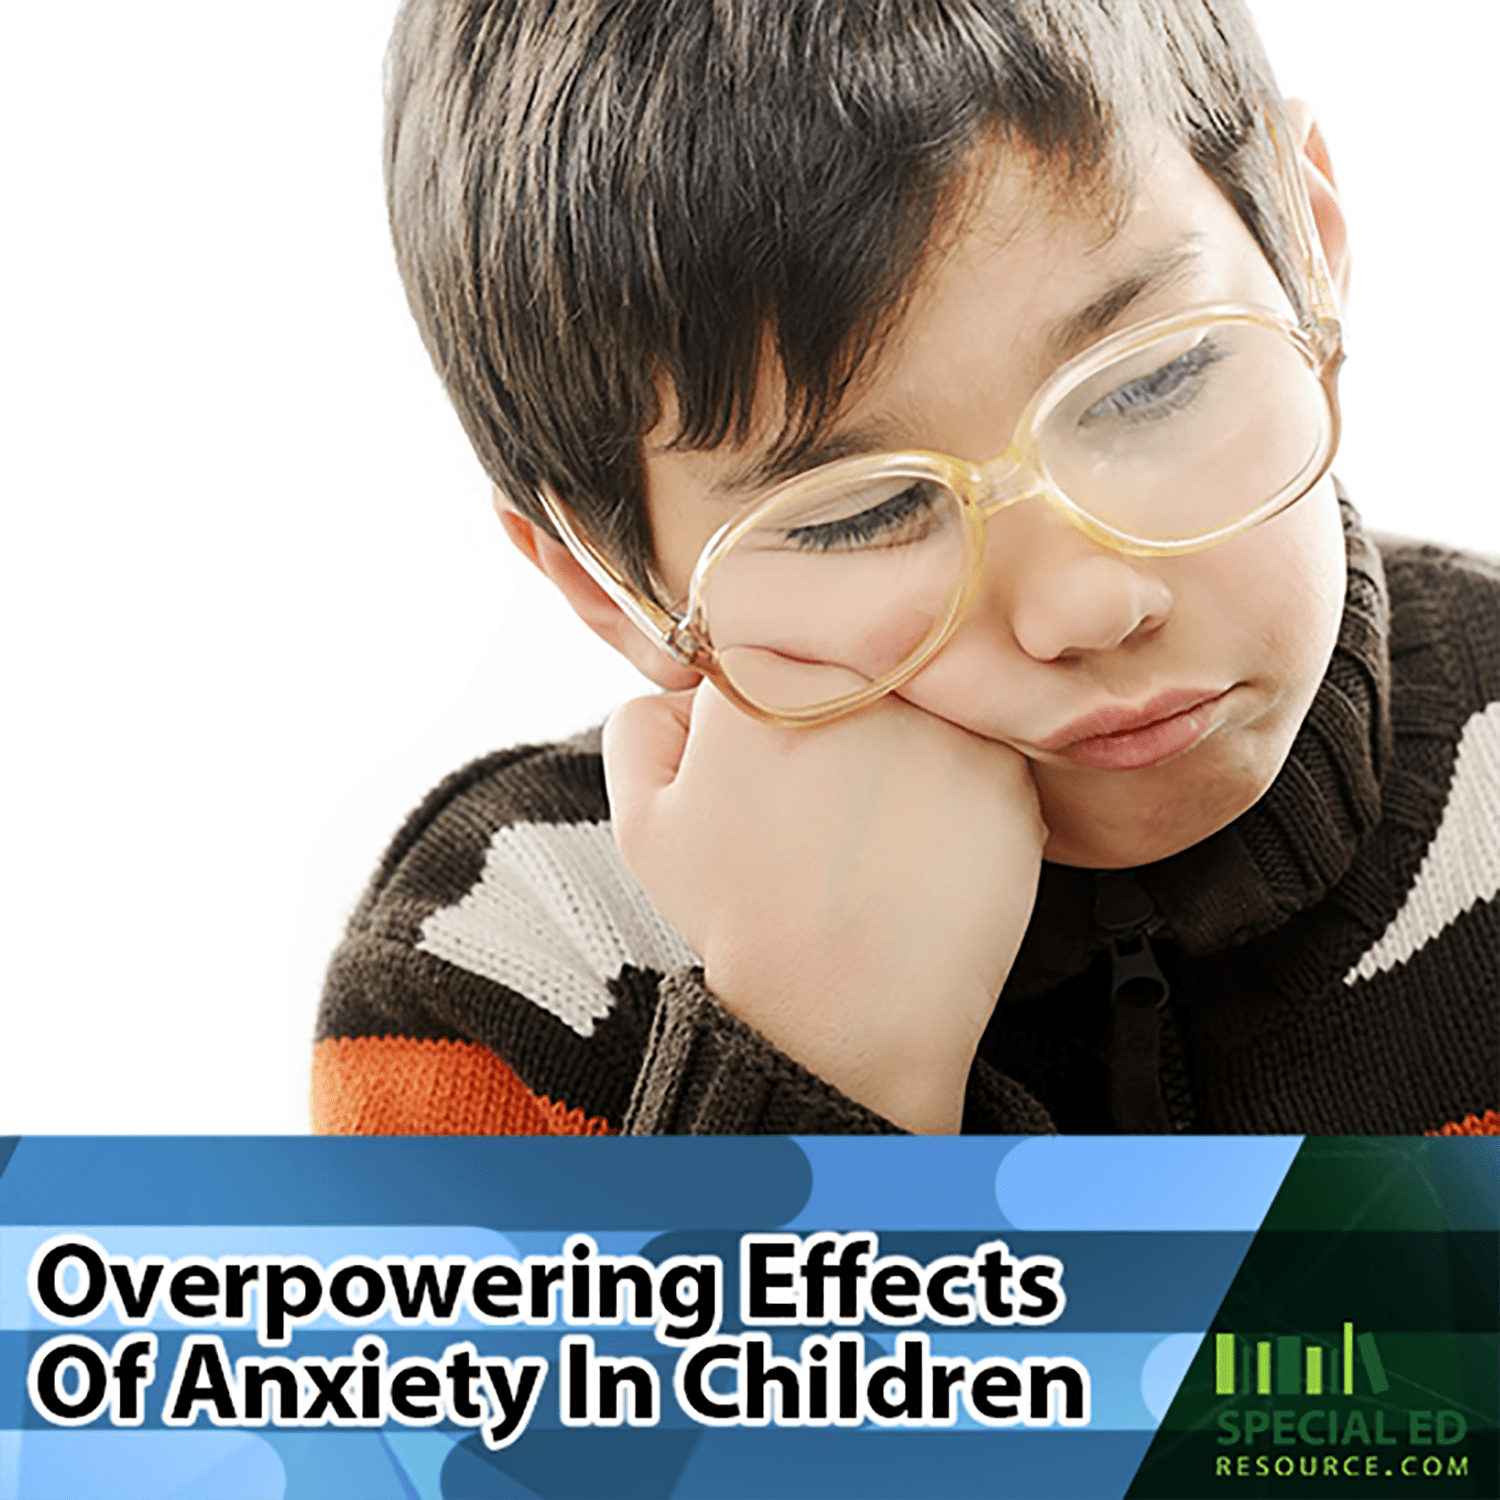 Overpowering Effects Of Anxiety In Children